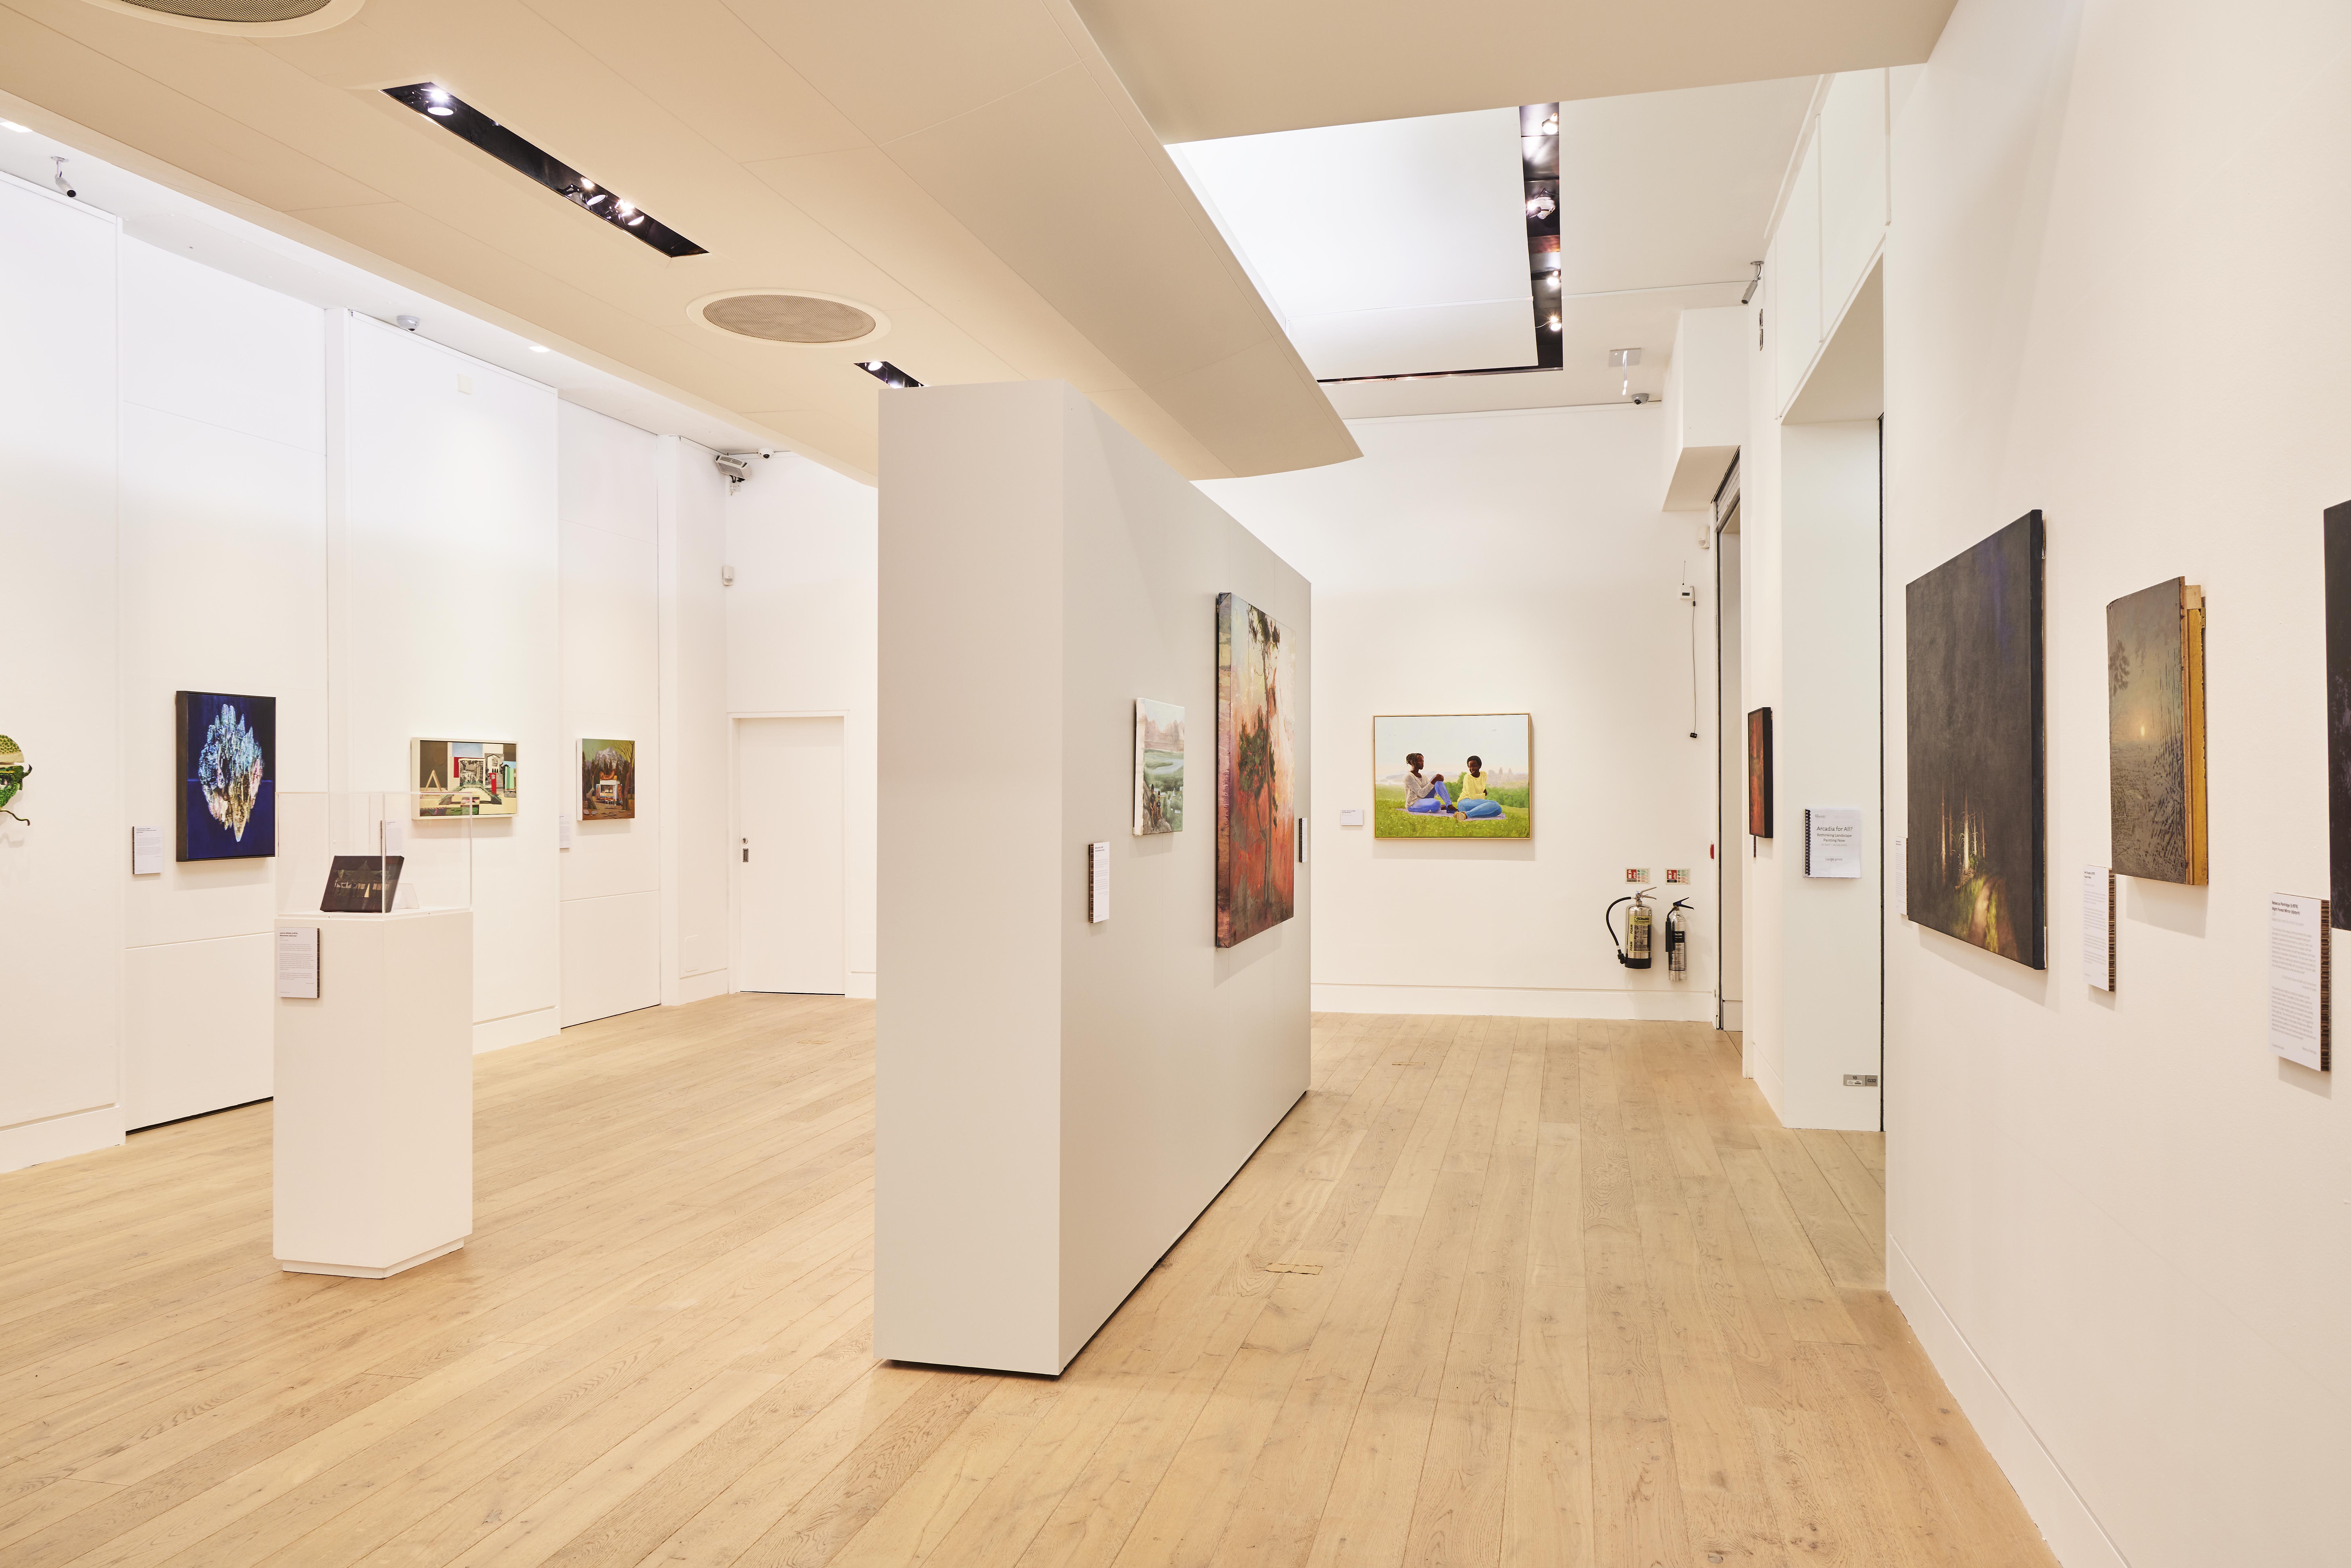 A gallery space with colourful landscape paintings hung on the walls